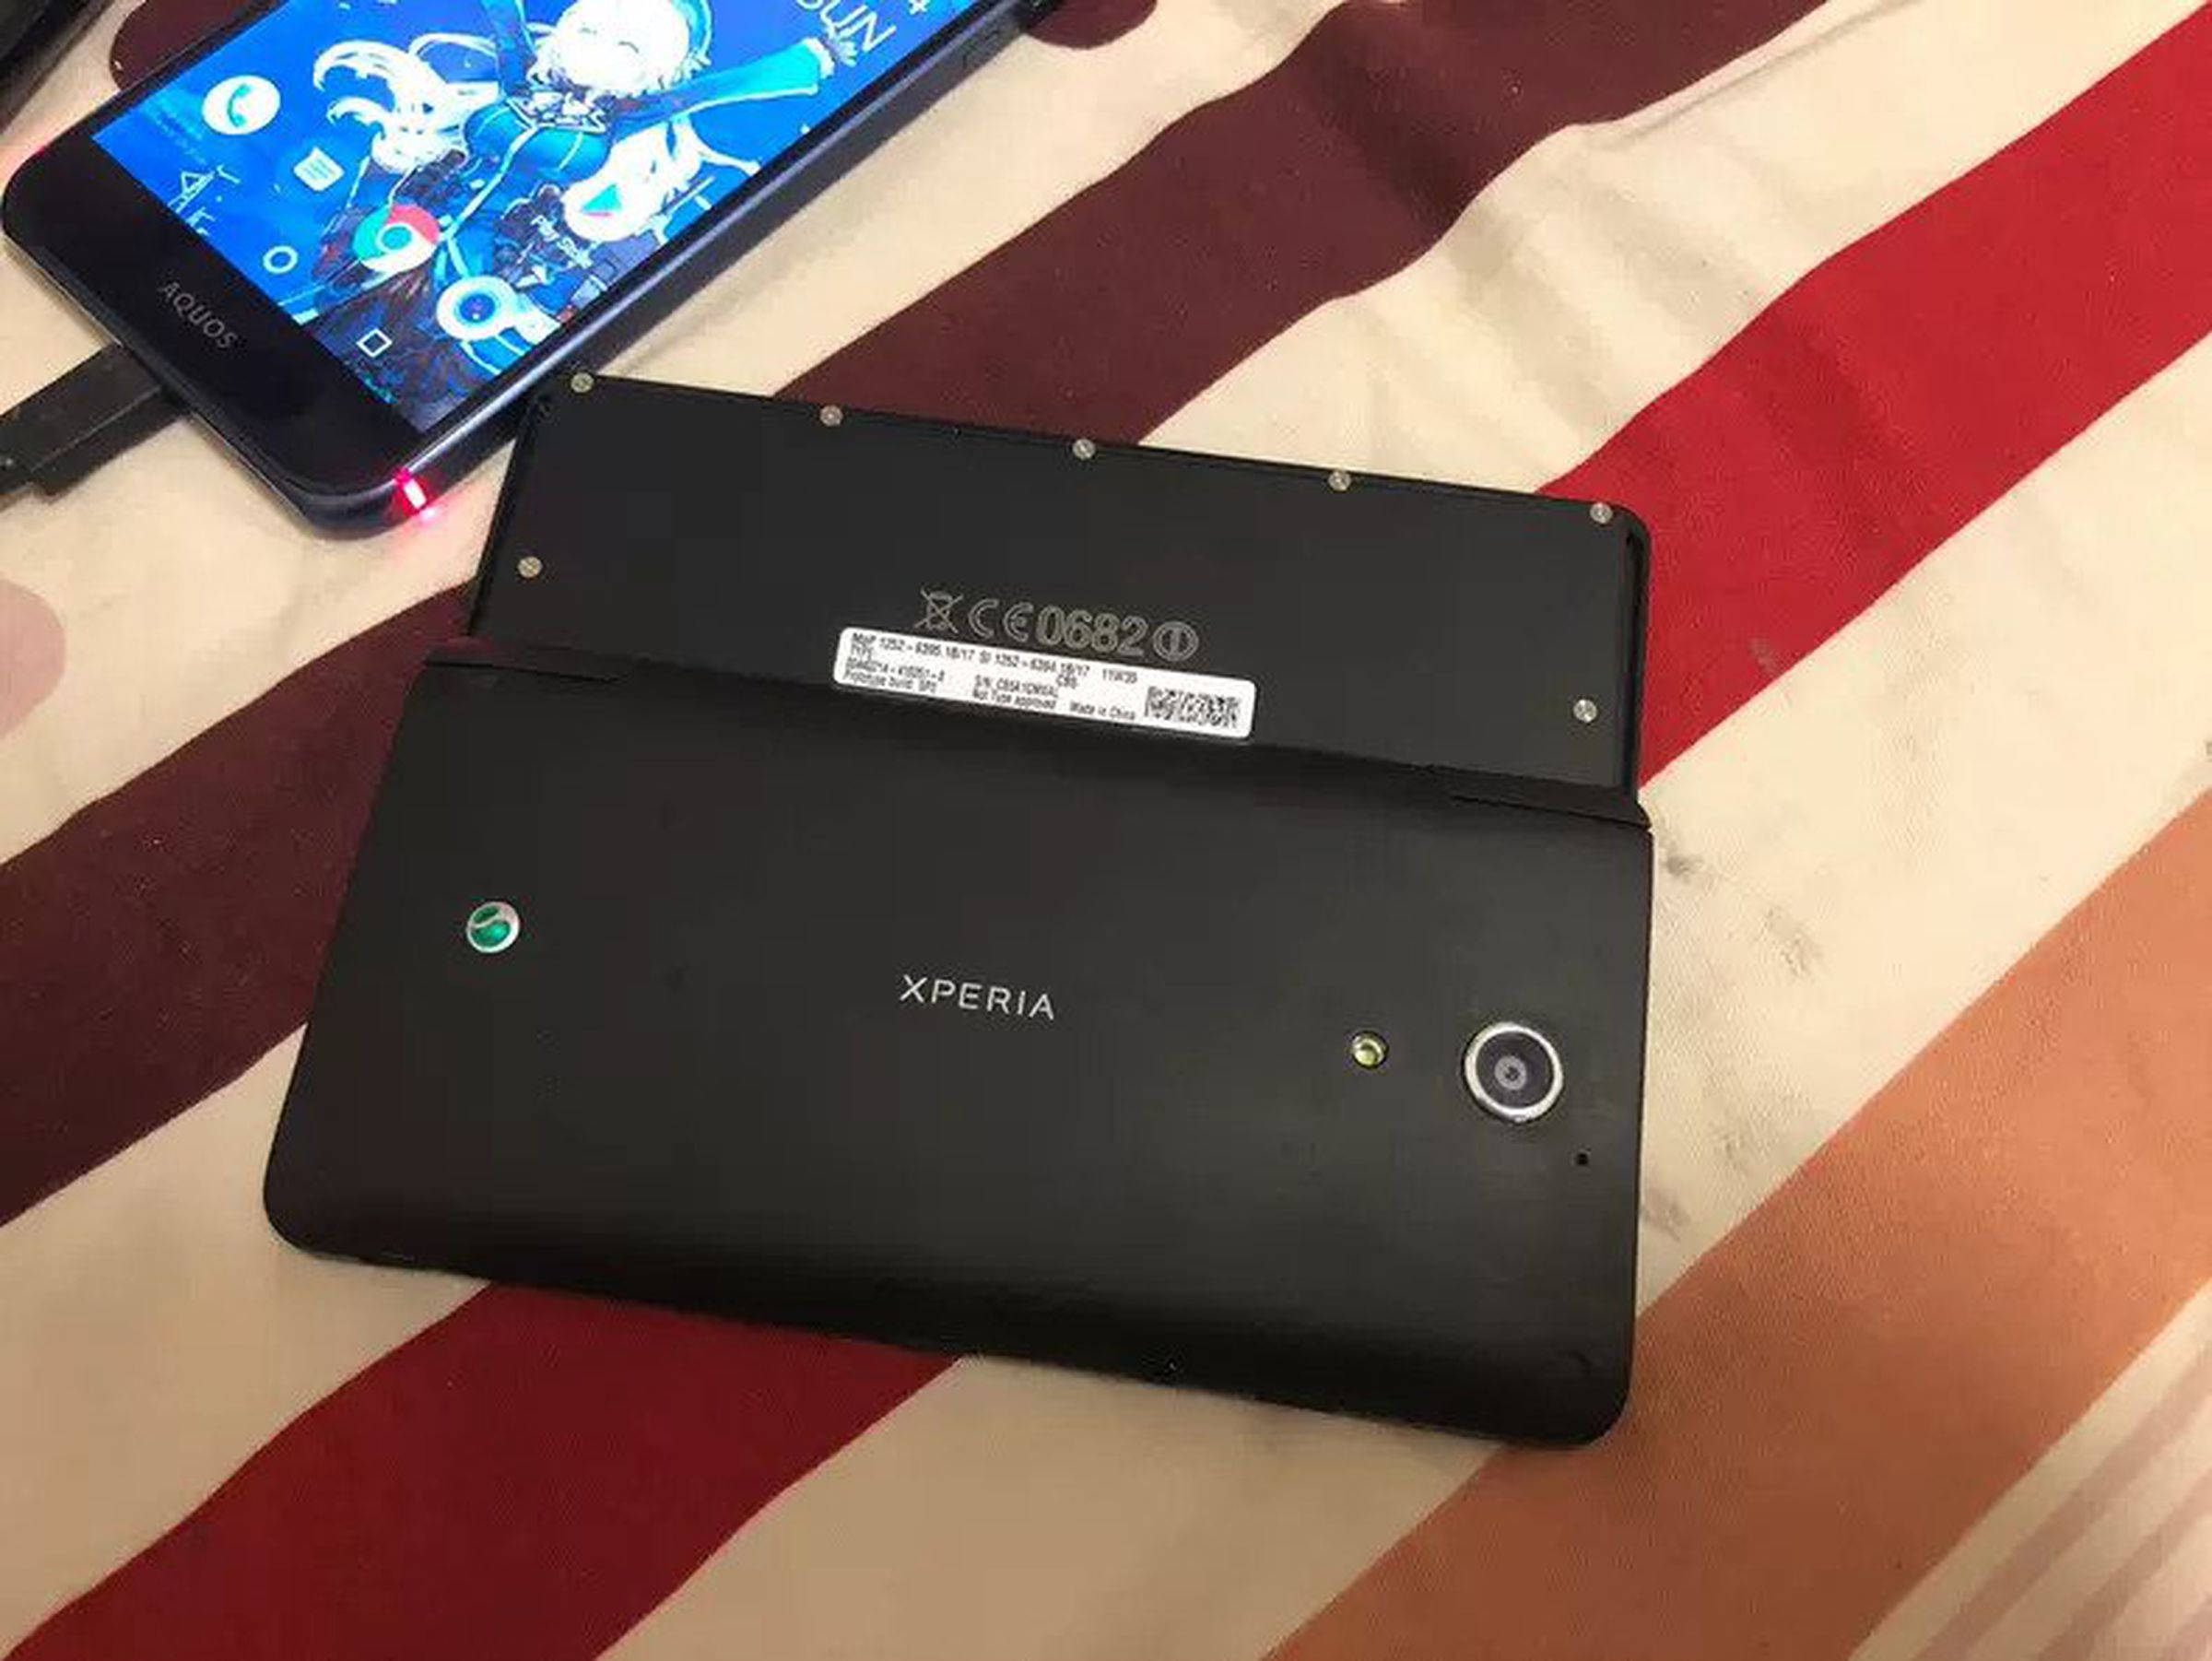 The rear of the device shows Sony’s old Xperia branding.